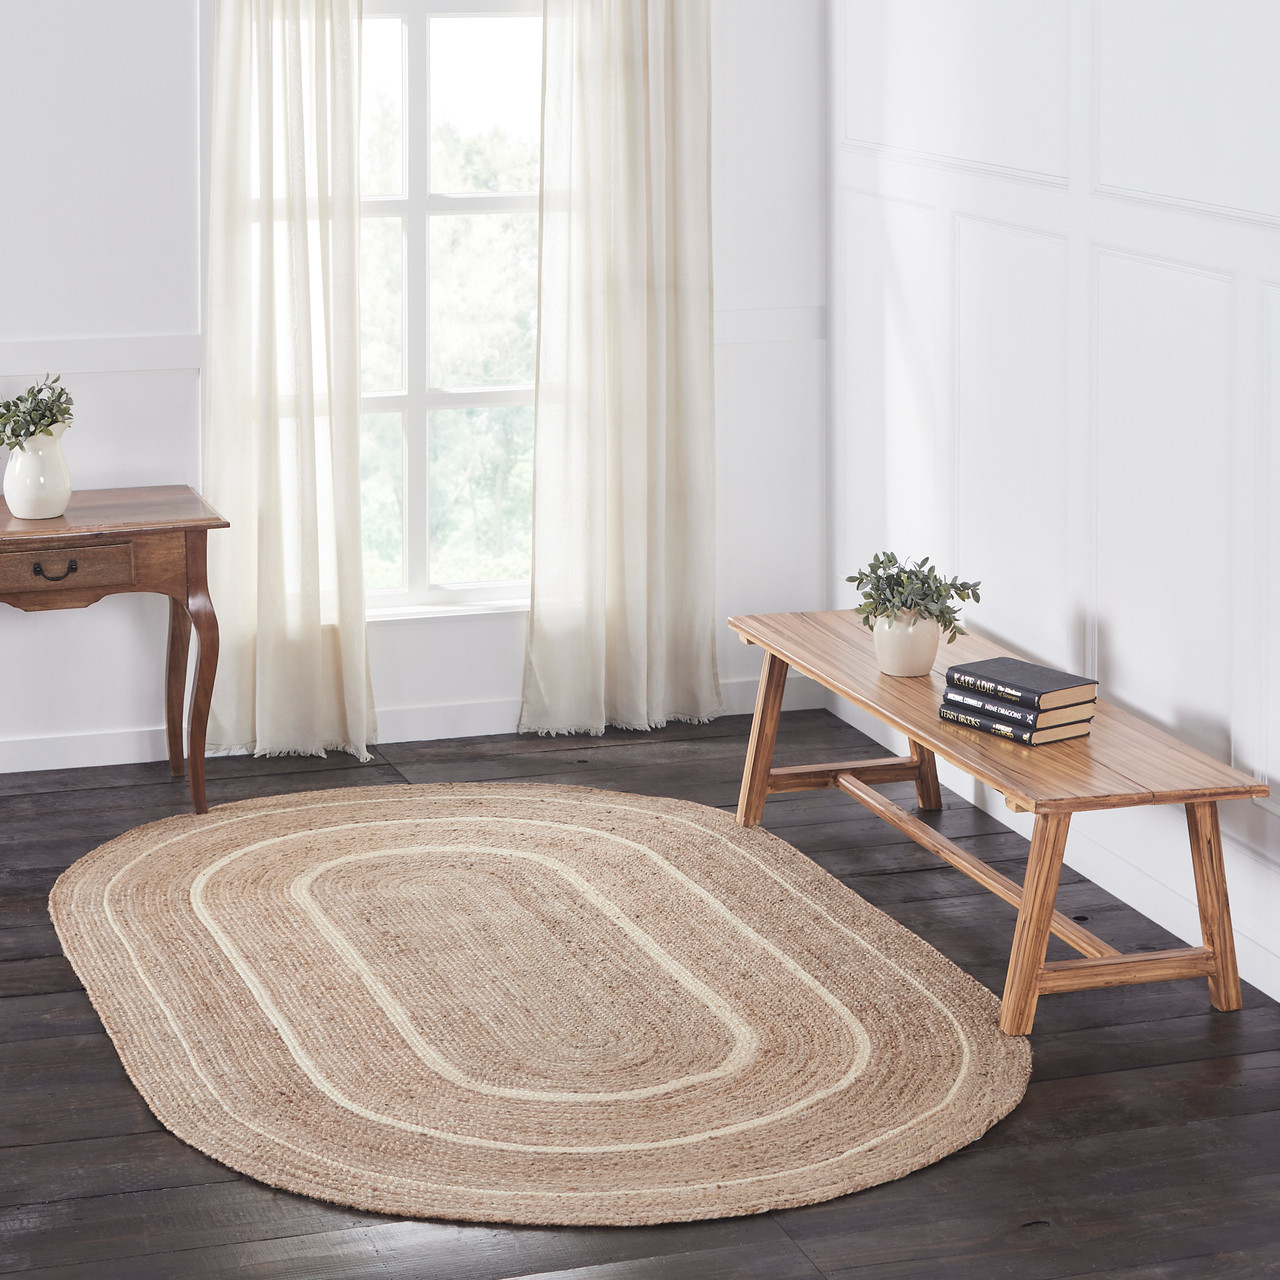 https://cdn11.bigcommerce.com/s-dwlxj/images/stencil/1280x1280/products/5301/12336/80373-vhc-brands-oval-braided-jute-rug-natural-cream-60x96-1__29634.1656634823.jpg?c=2